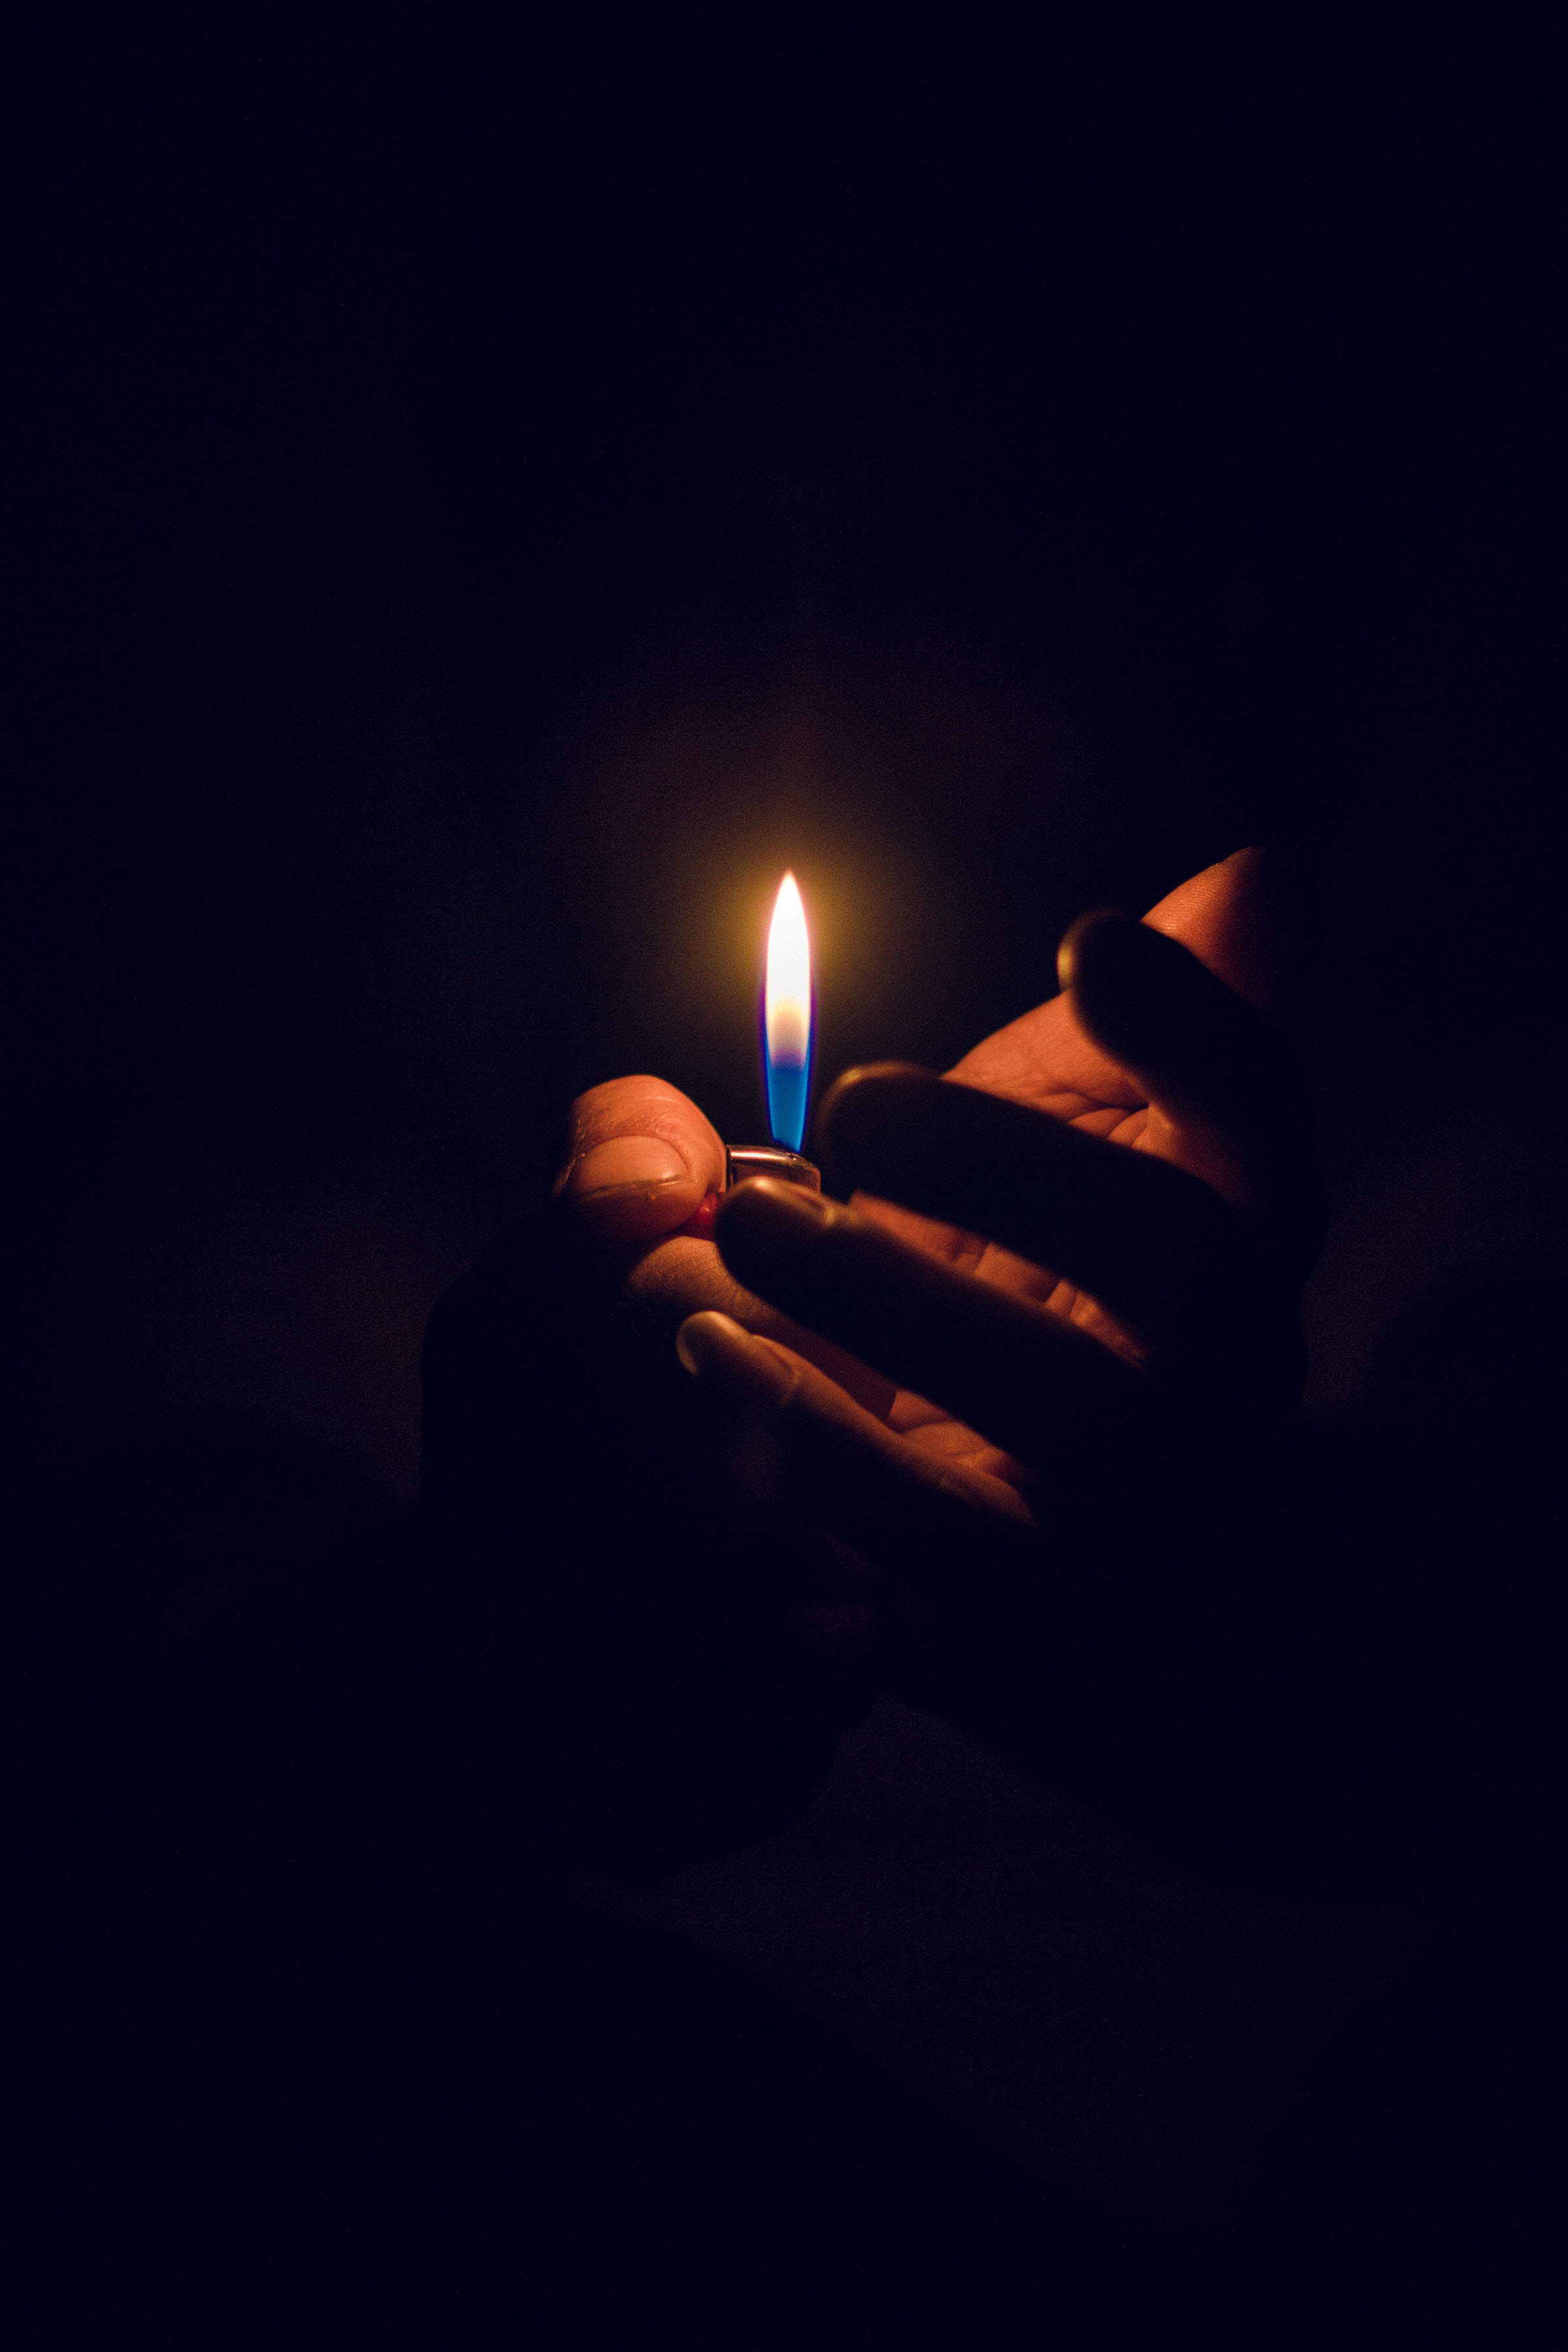 flame, hand, dark, candle cell phone wallpapers